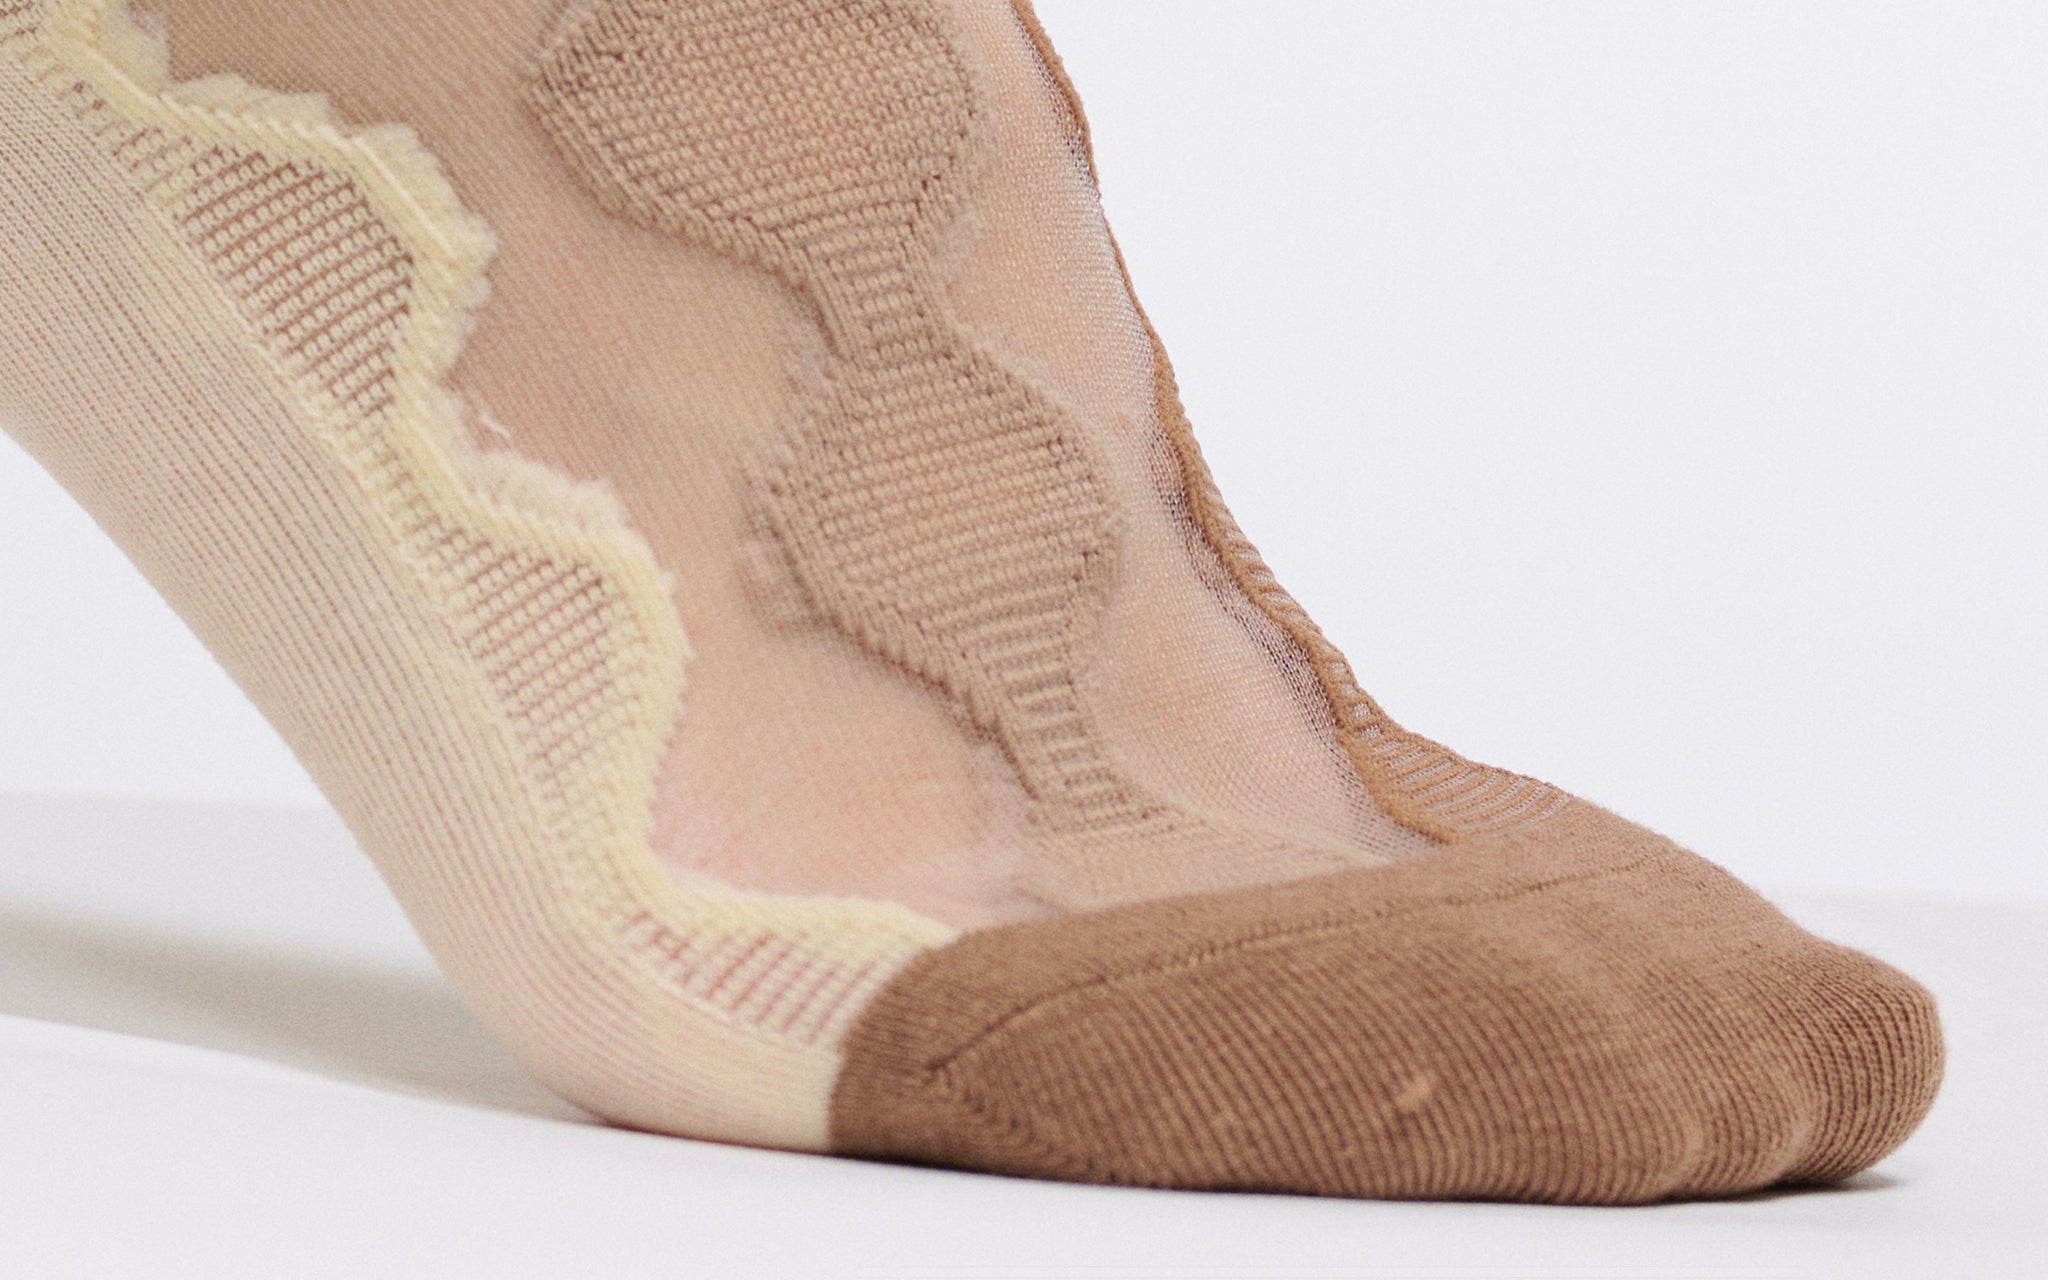 The Semi Sheer Cappuccino Socks | A Sweet Confection for Vintage Cottagecore Vibes | Cutout Socks in Brown Tan and Beige | Goose Taffy